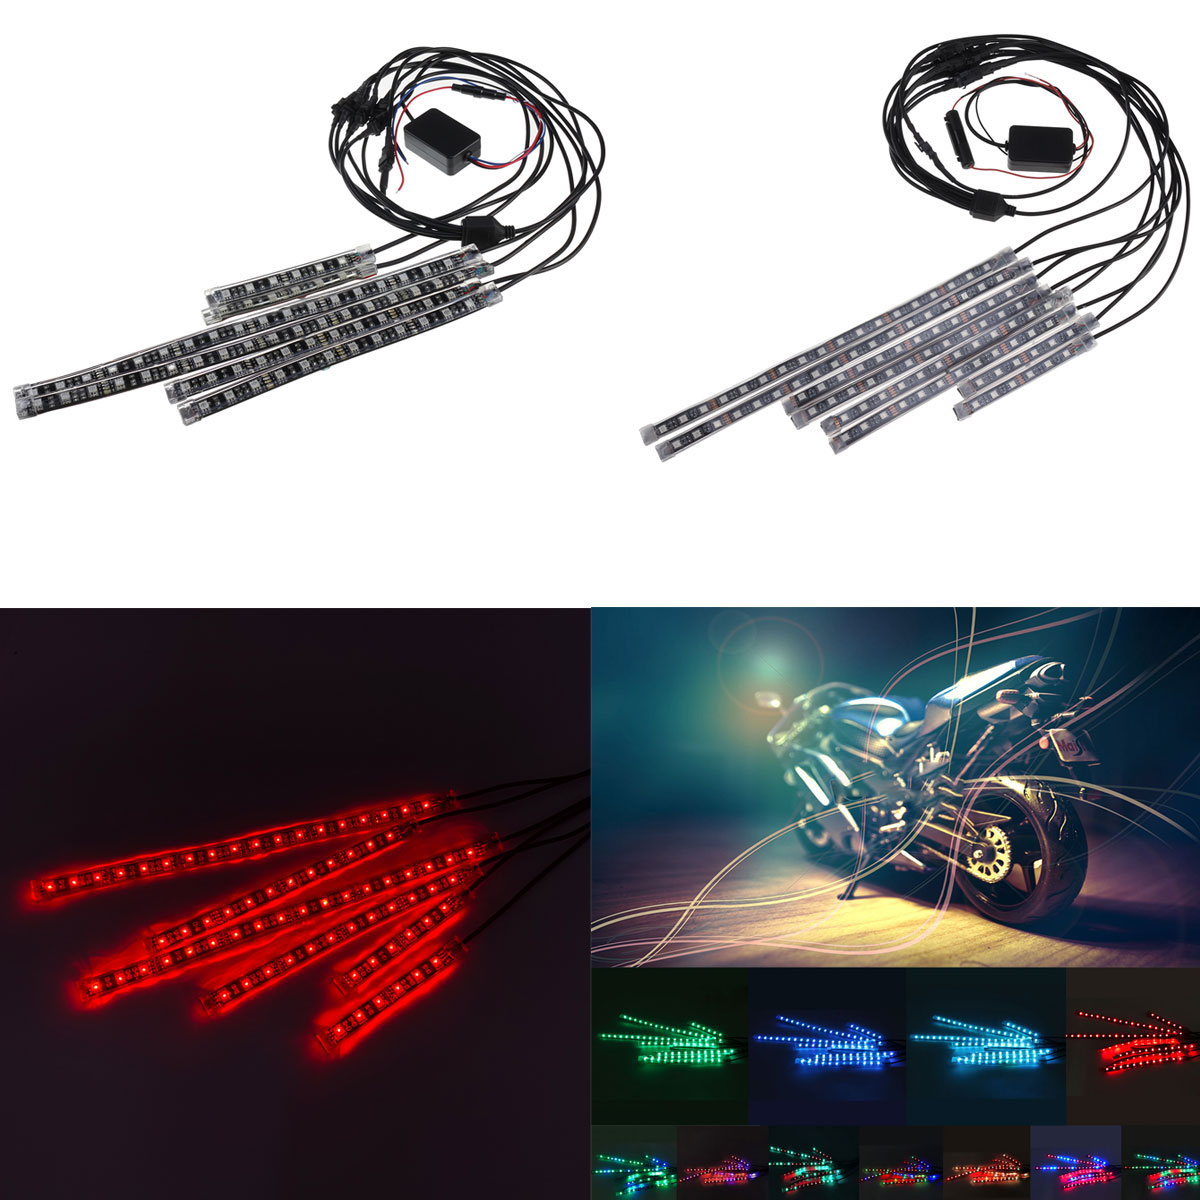 

12V 8Pcs 30CM Waterproof LED Flexible Atmosphere SMD Strip Light Underbody For Automobile Car Motorcycle Truck ATV Snowm